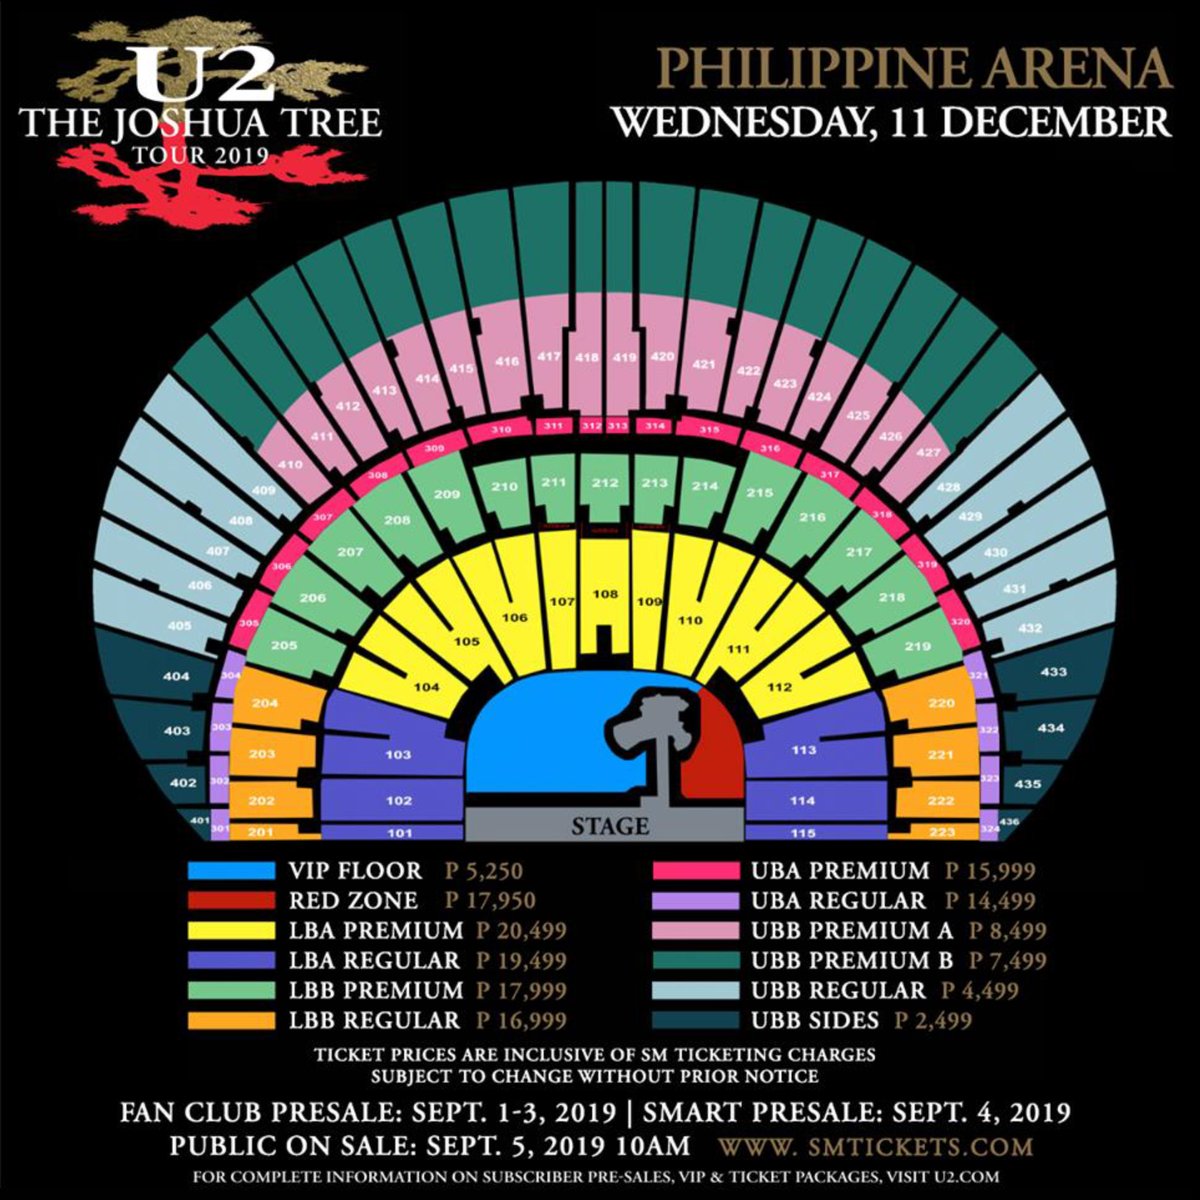 Read on if you’re still undecided about watching U2 at Philippine Arena. RT if you’re ready for ticketing! 🎫 #U2inManila